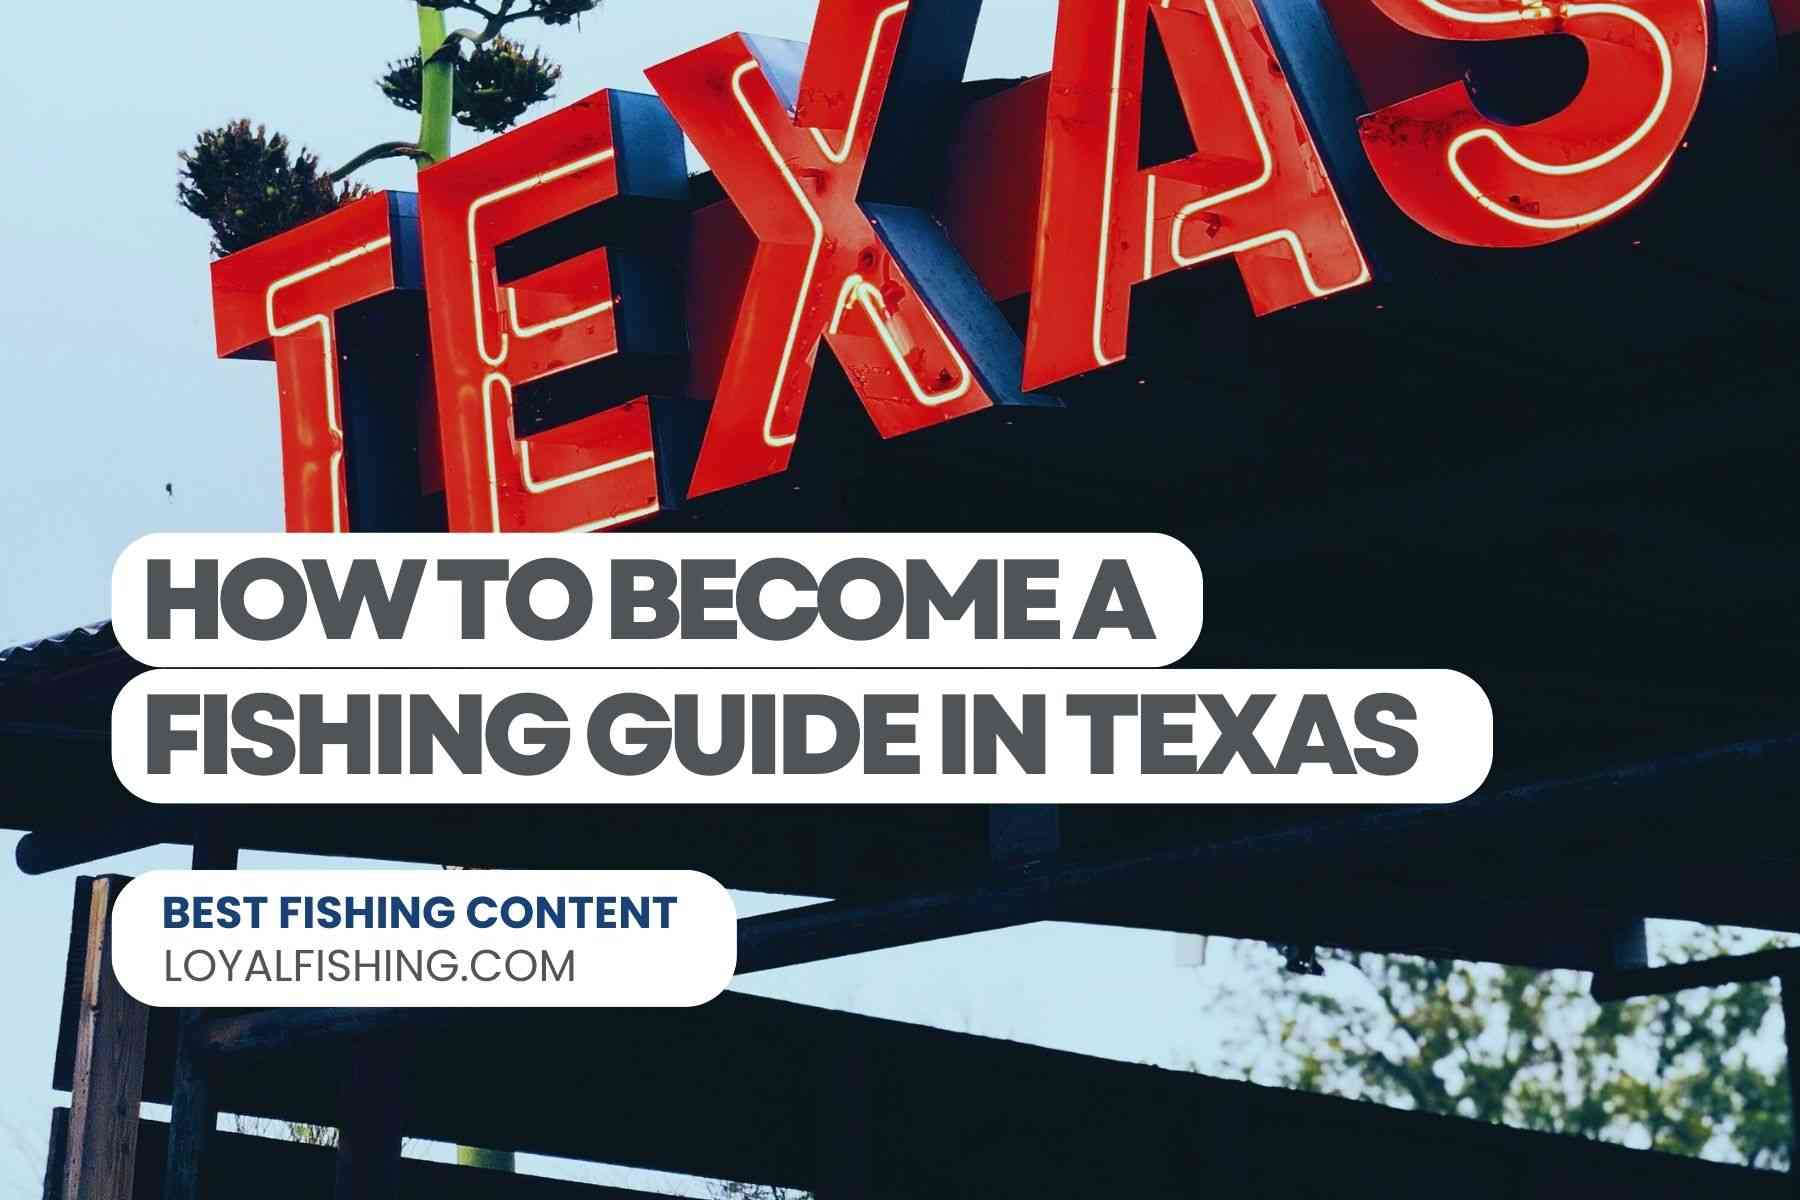 How to Become a Fishing Guide in Texas